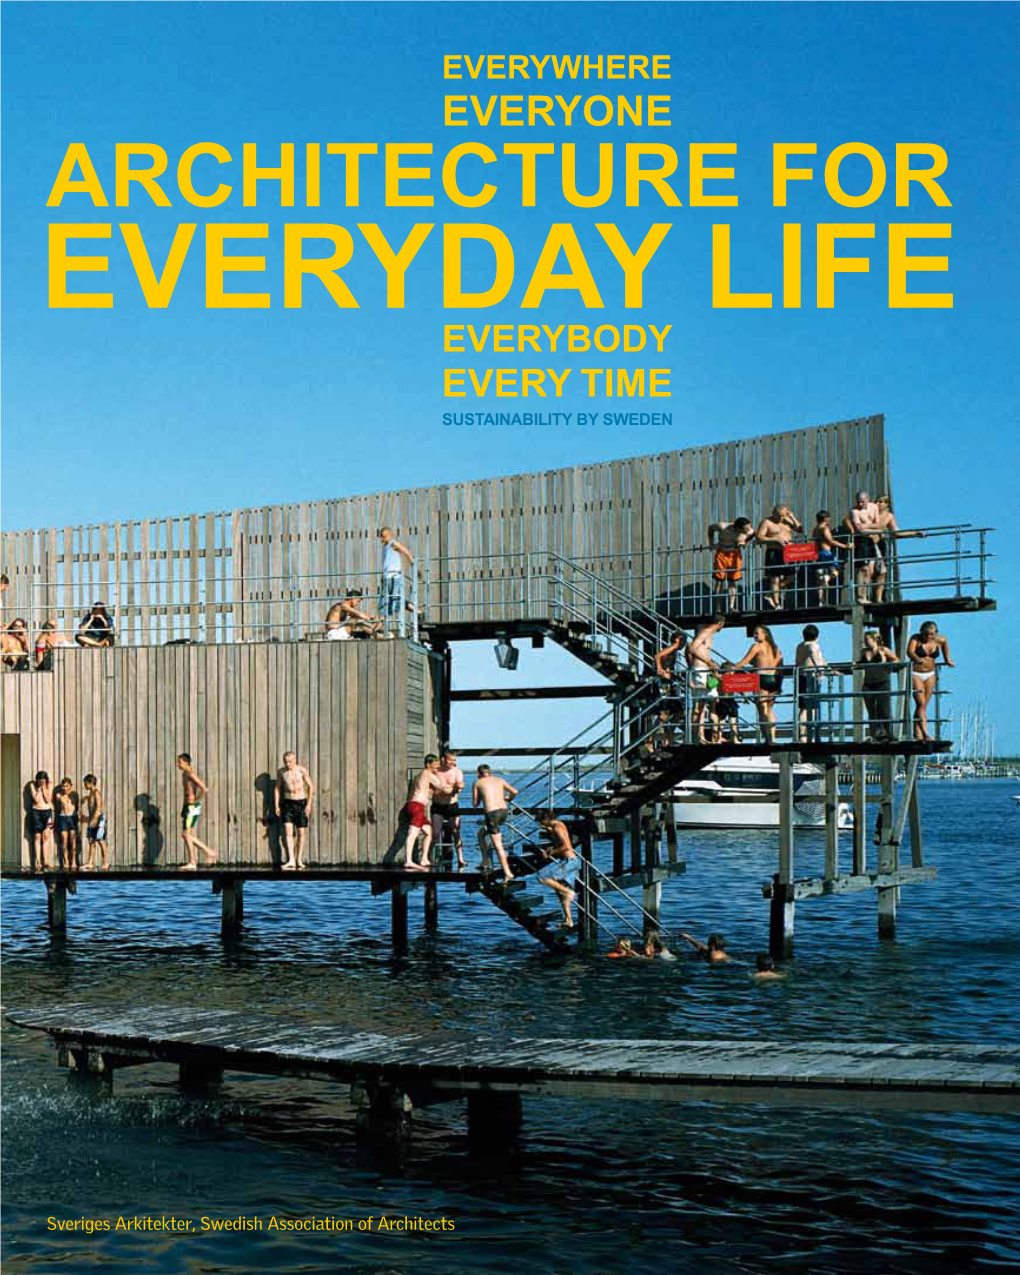 Architecture for Everydeverybodyay Life Every Time Sustainability by Sweden